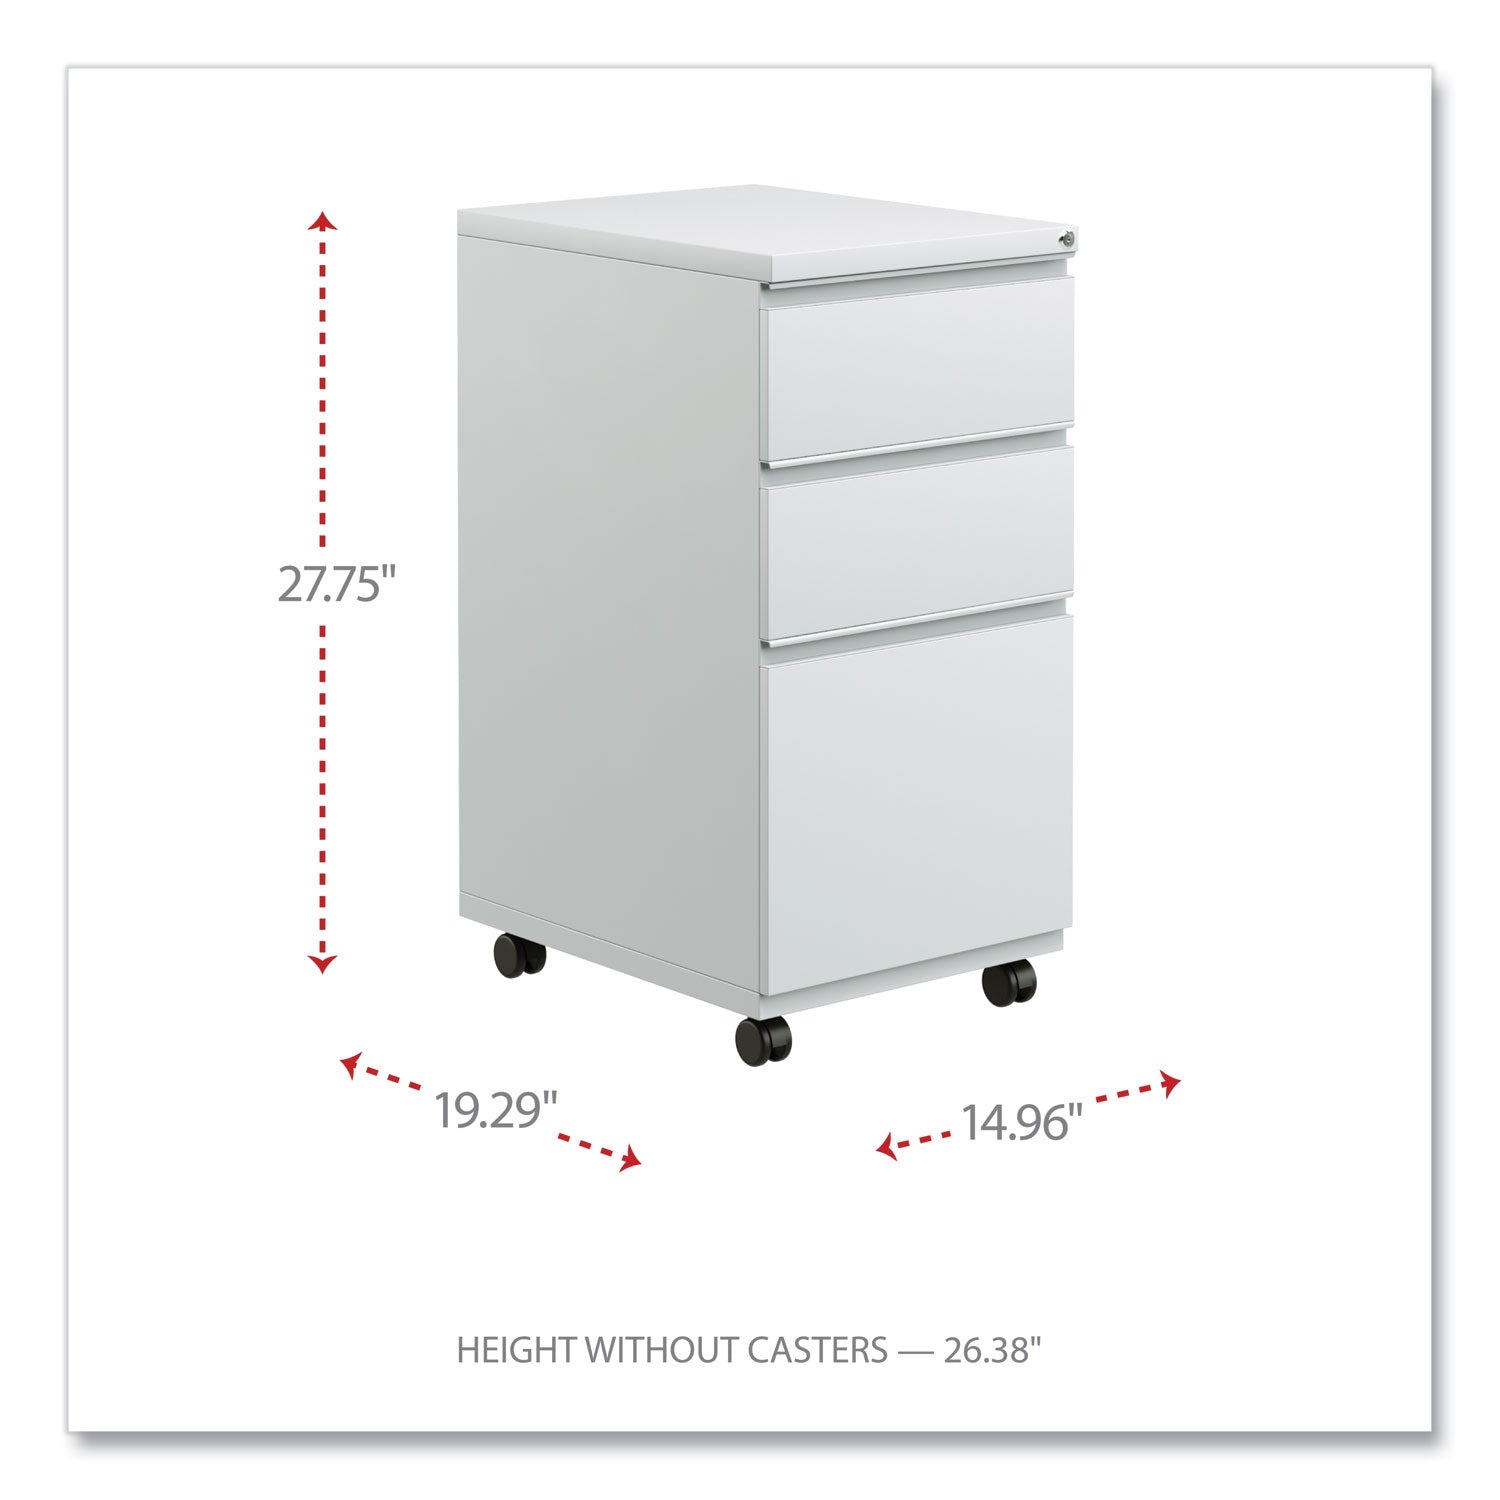 file-pedestal-with-full-length-pull-left-right-3-drawers-box-box-file-legal-letter-light-gray-1496-x-1929-x-2775_alepbbbflg - 2